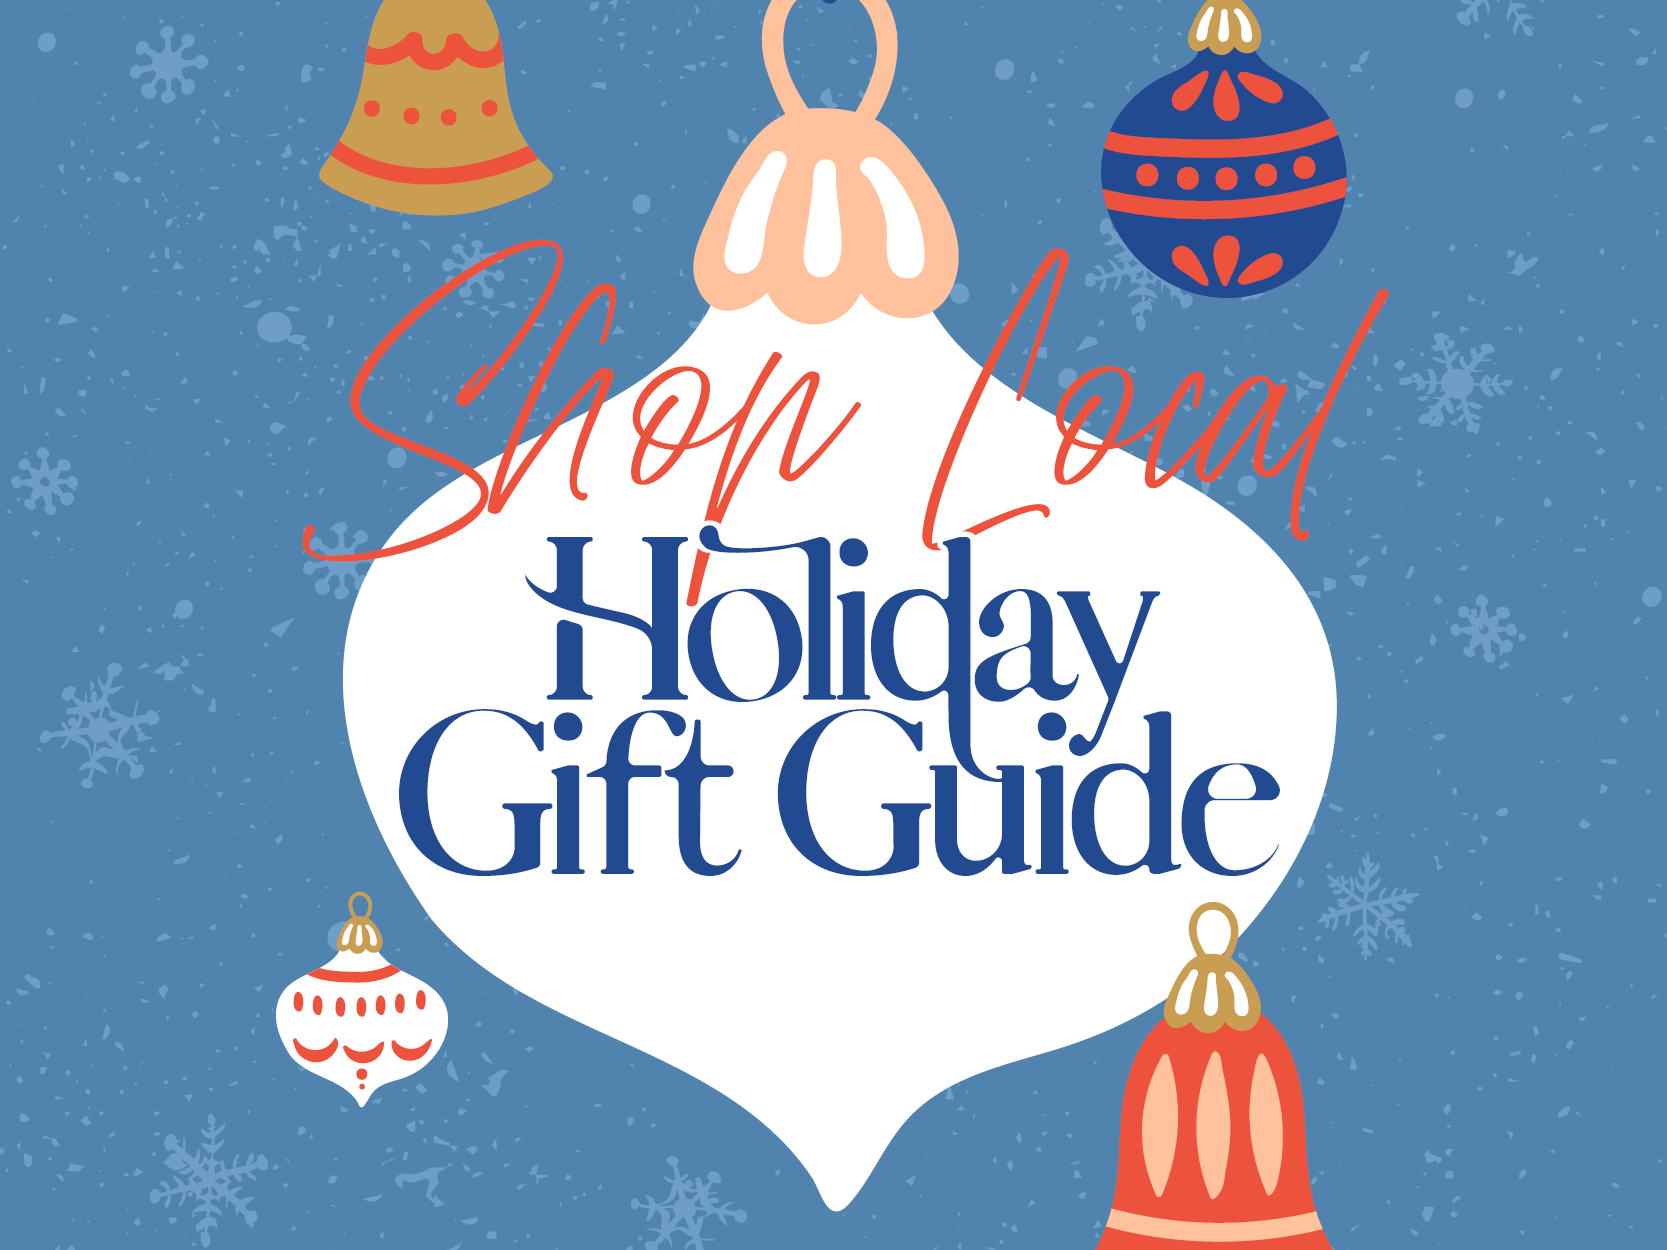 Holiday Gift Guide: Shop Local